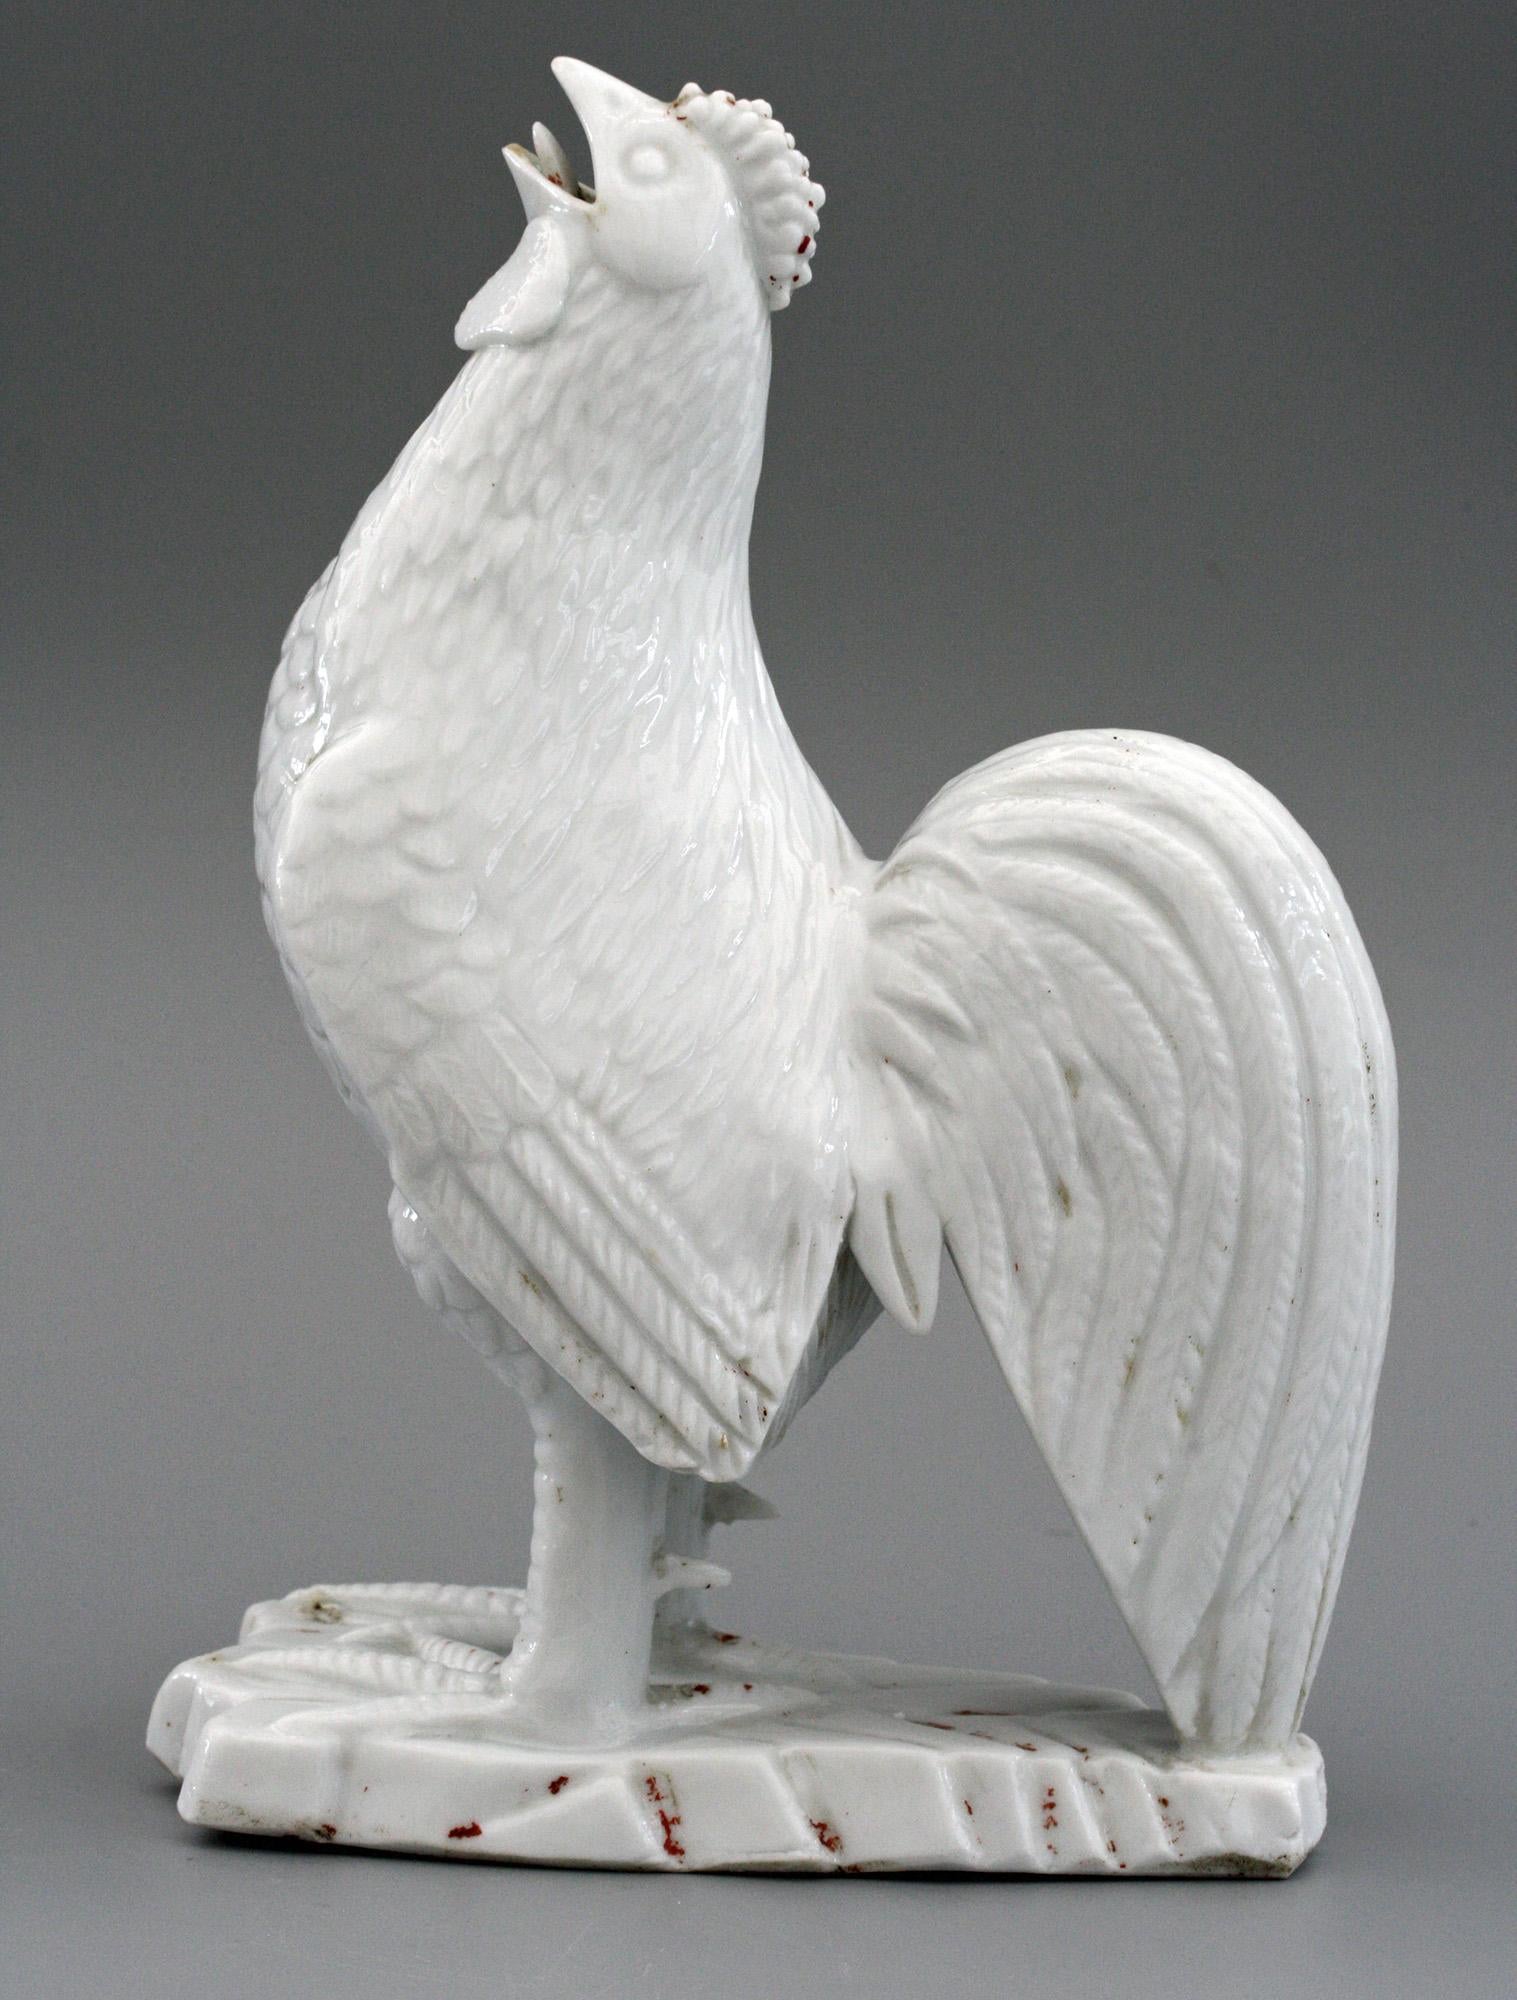 An extremely rare and finely made Chinese Kangxi porcelain blanc de chine figure of a cockerel. The cockerel stands on a shaped base with good feather detailing and stands crowing with its mouth open. There are few remnants of red on the base and